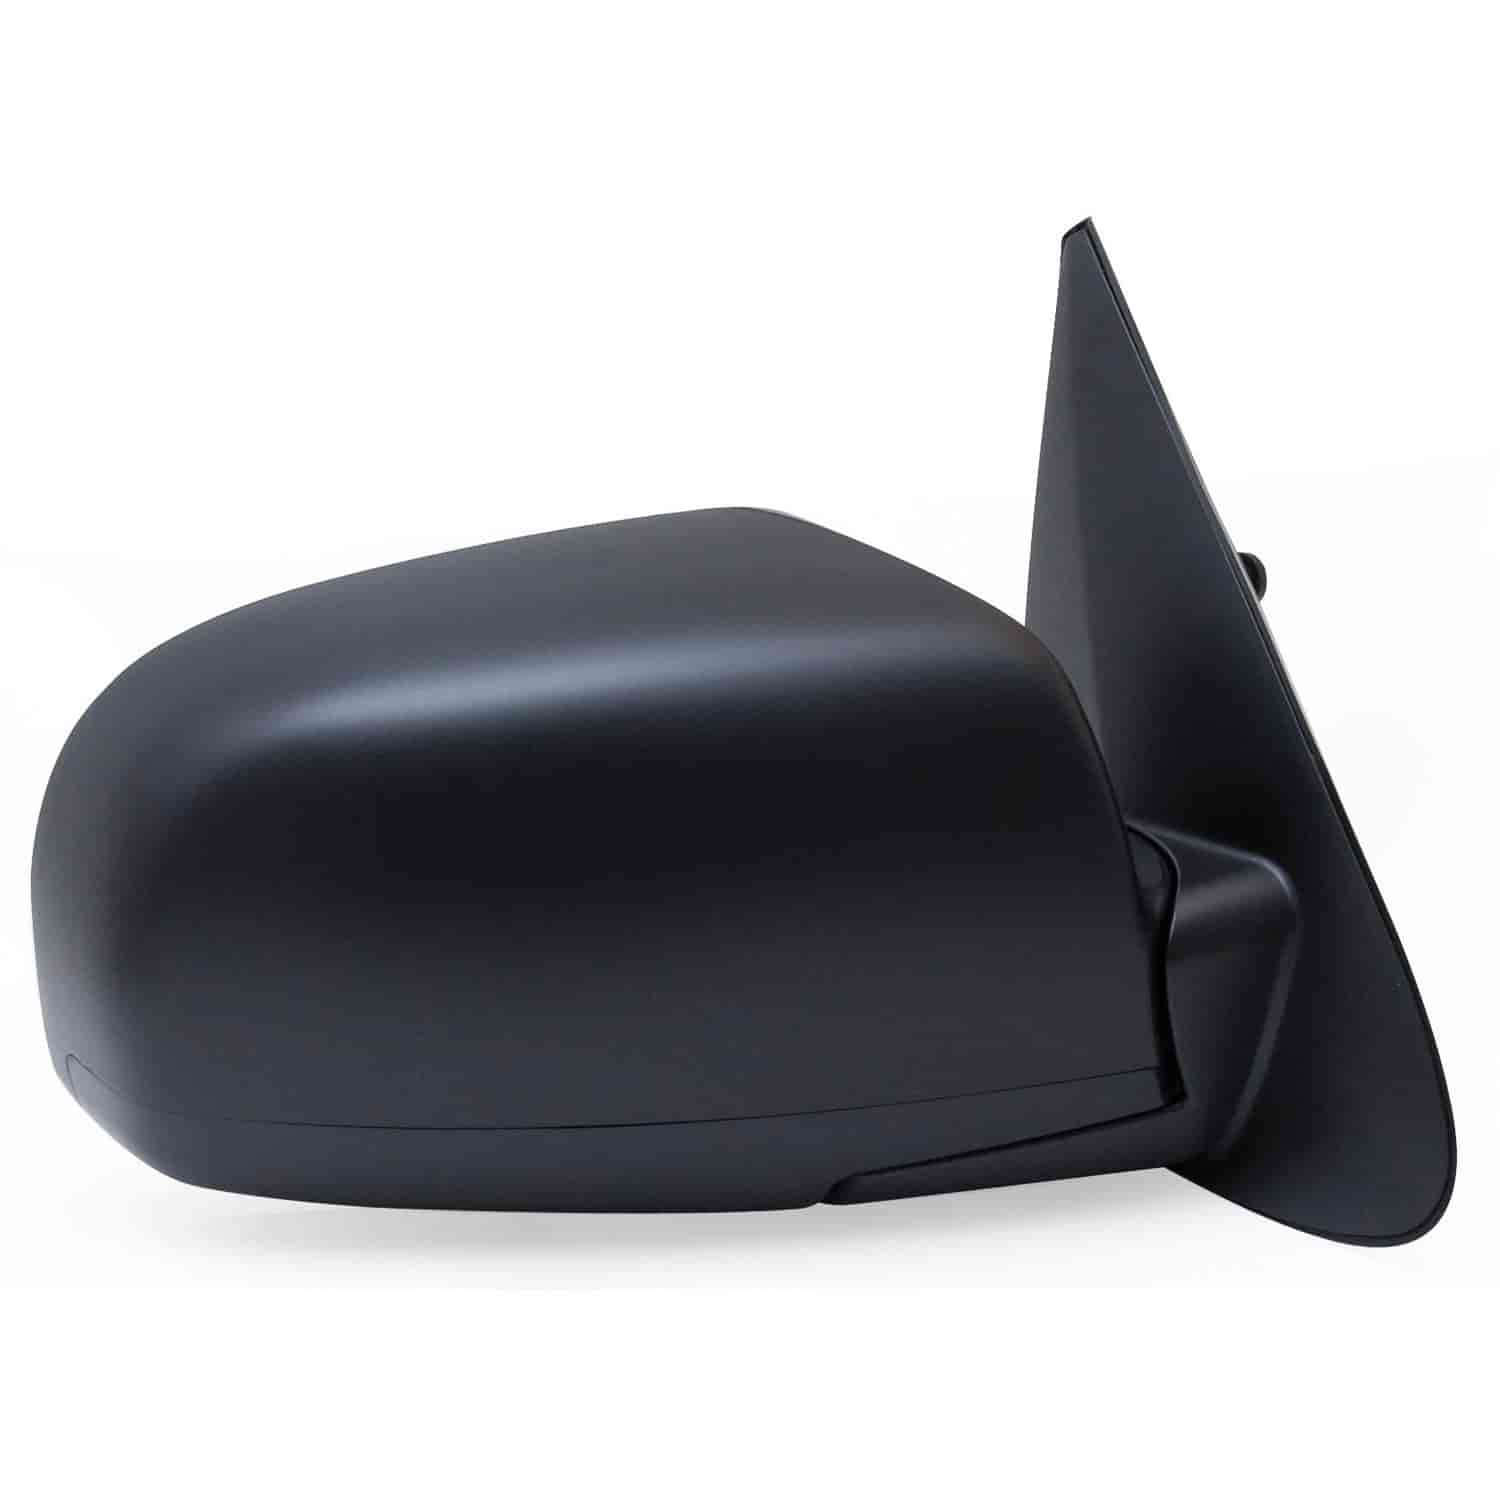 OEM Style Replacement mirror for 07-09 Hyundai Santa Fe passenger side mirror tested to fit and func